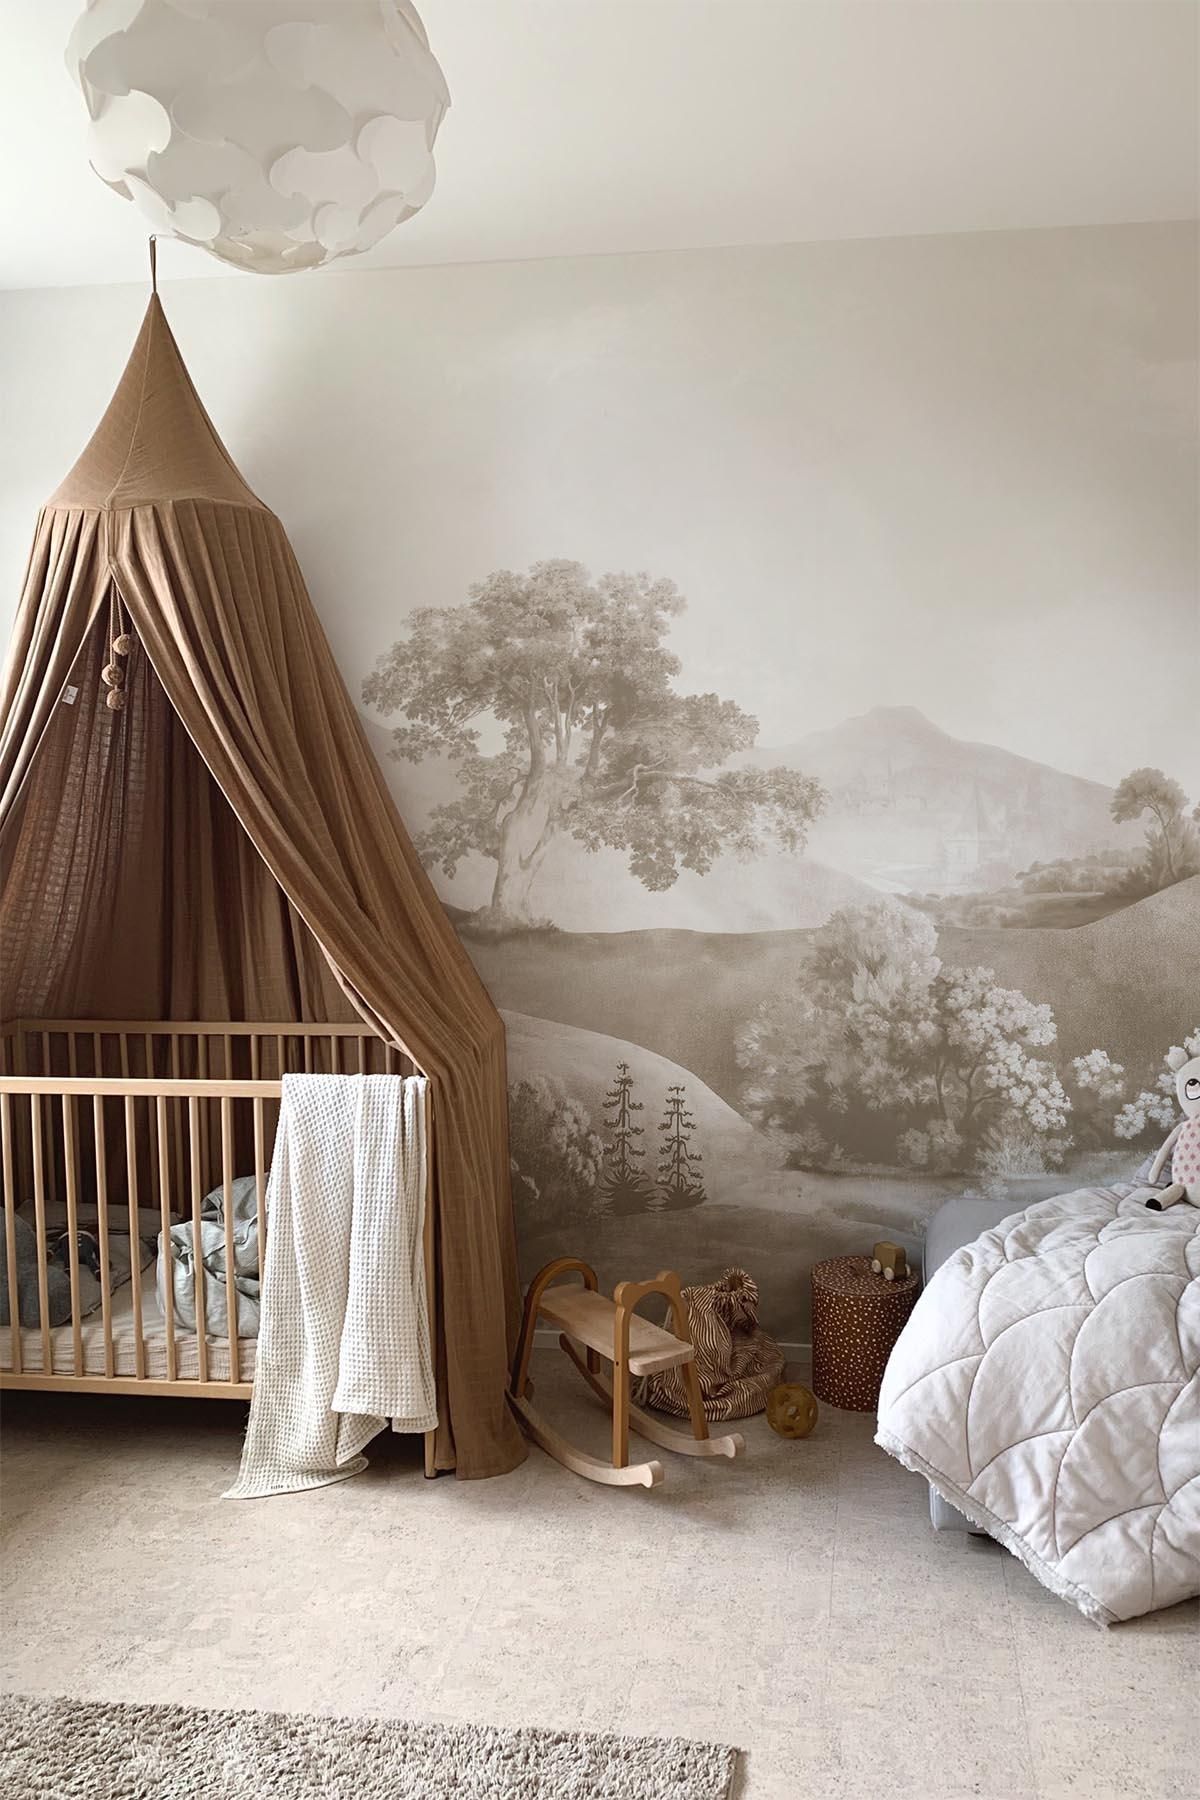 Transform Your Bedroom with Stunning Wall
Mural Ideas